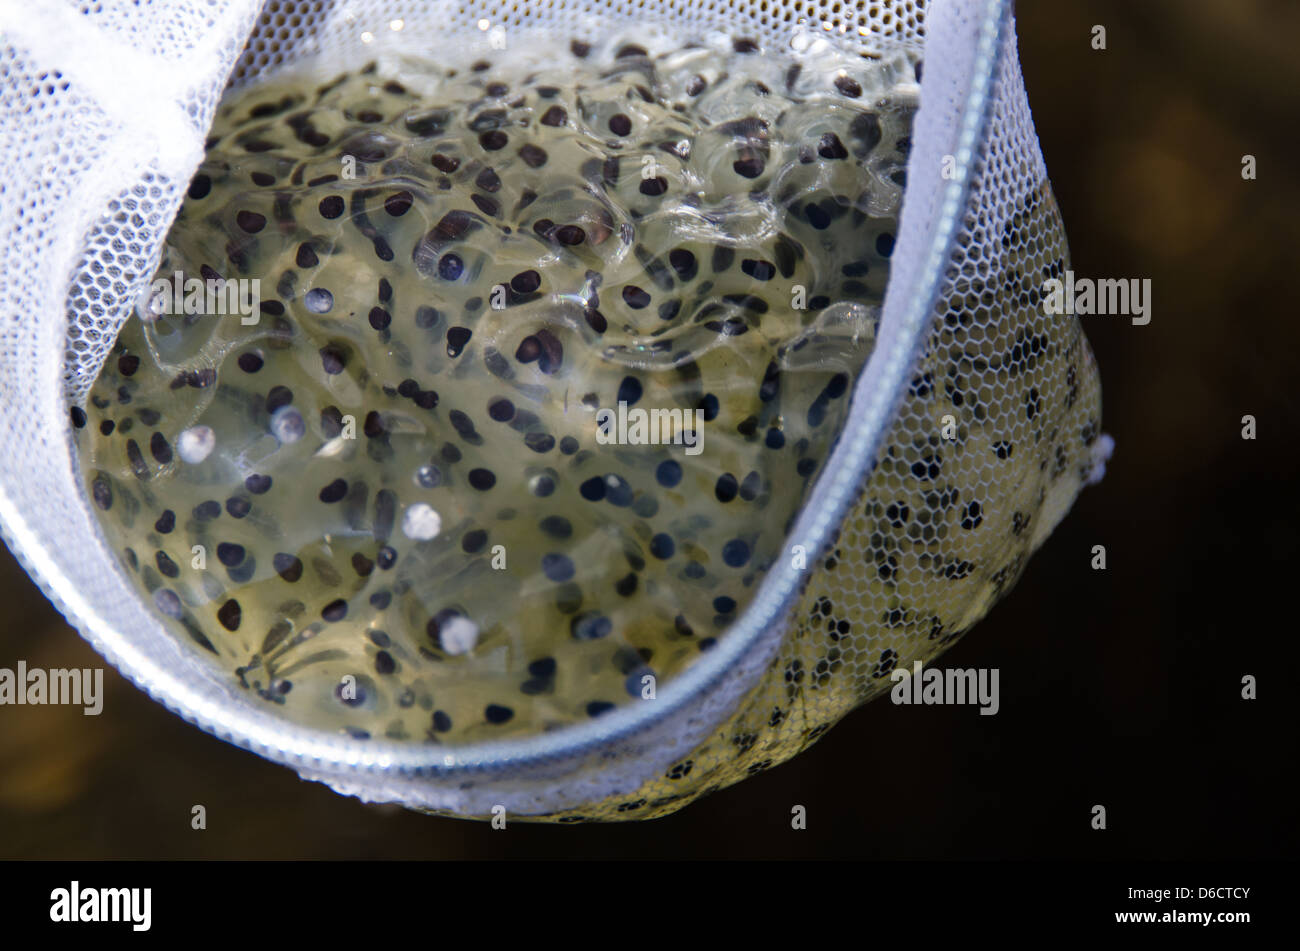 White Mesh Dip Net Holding A Mass Of Frogs Eggs Stock Photo - 